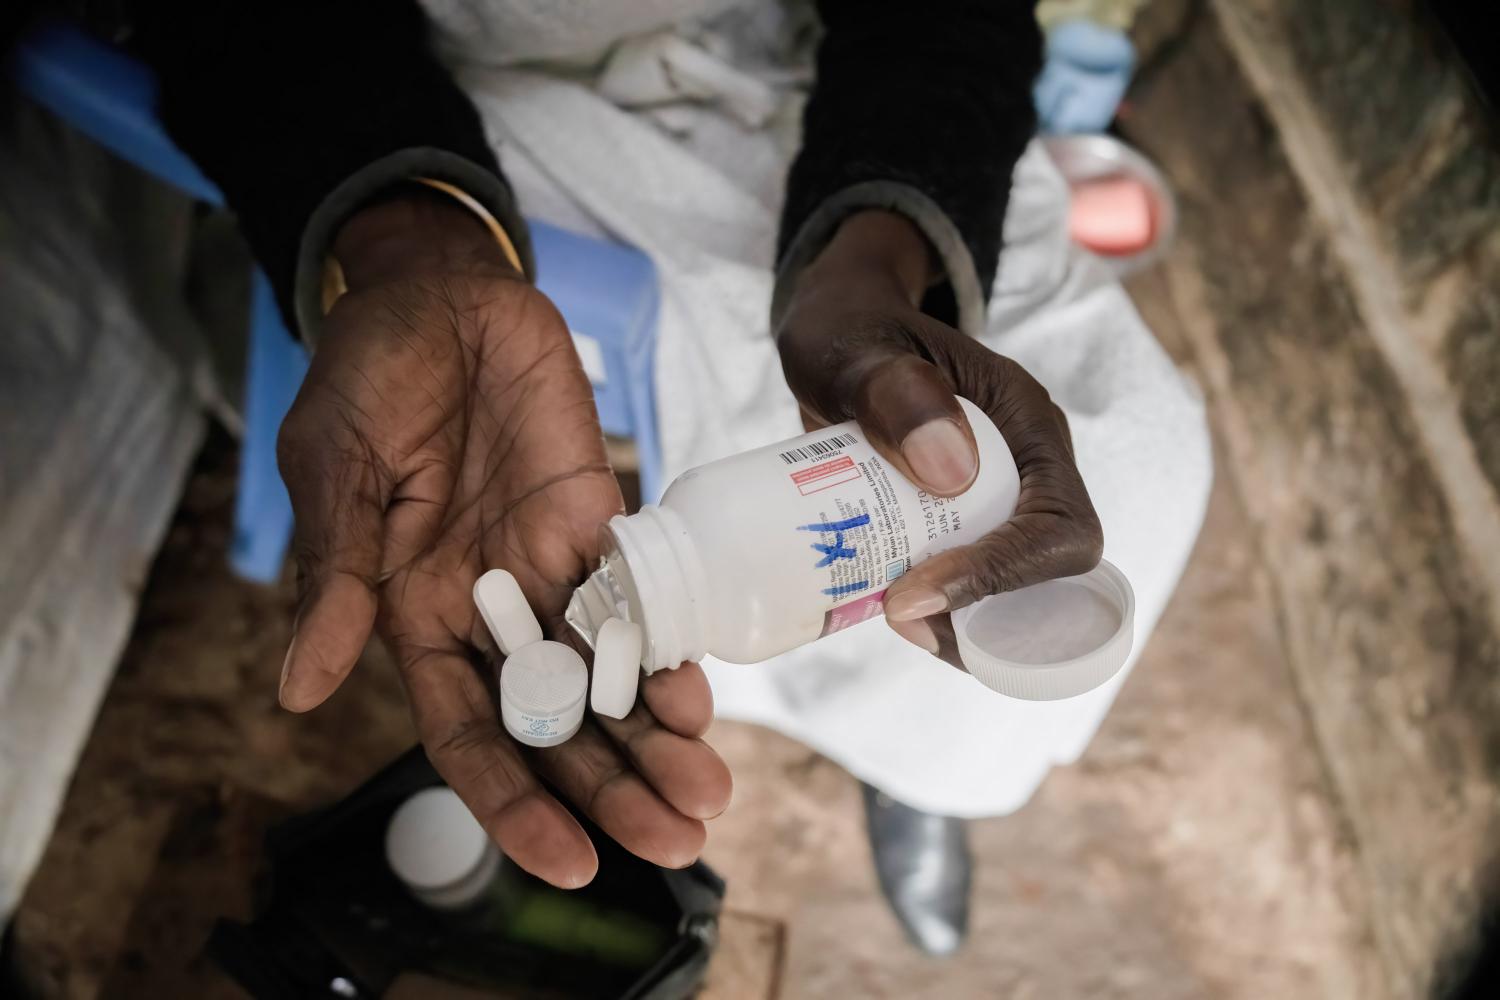 A woman takes her Antiretroviral drugs (ARVs) pills during the World Aids Day in Kibera.As today marks 33 years since the beginning of World Aids Day and 40 years since the first case of HIV, it's also one of the greatest days to help put an end to inequality that drives Aids and other pandemics across the world. (Photo by Donwilson Odhiambo / SOPA Images/Sipa USA)No Use Germany.